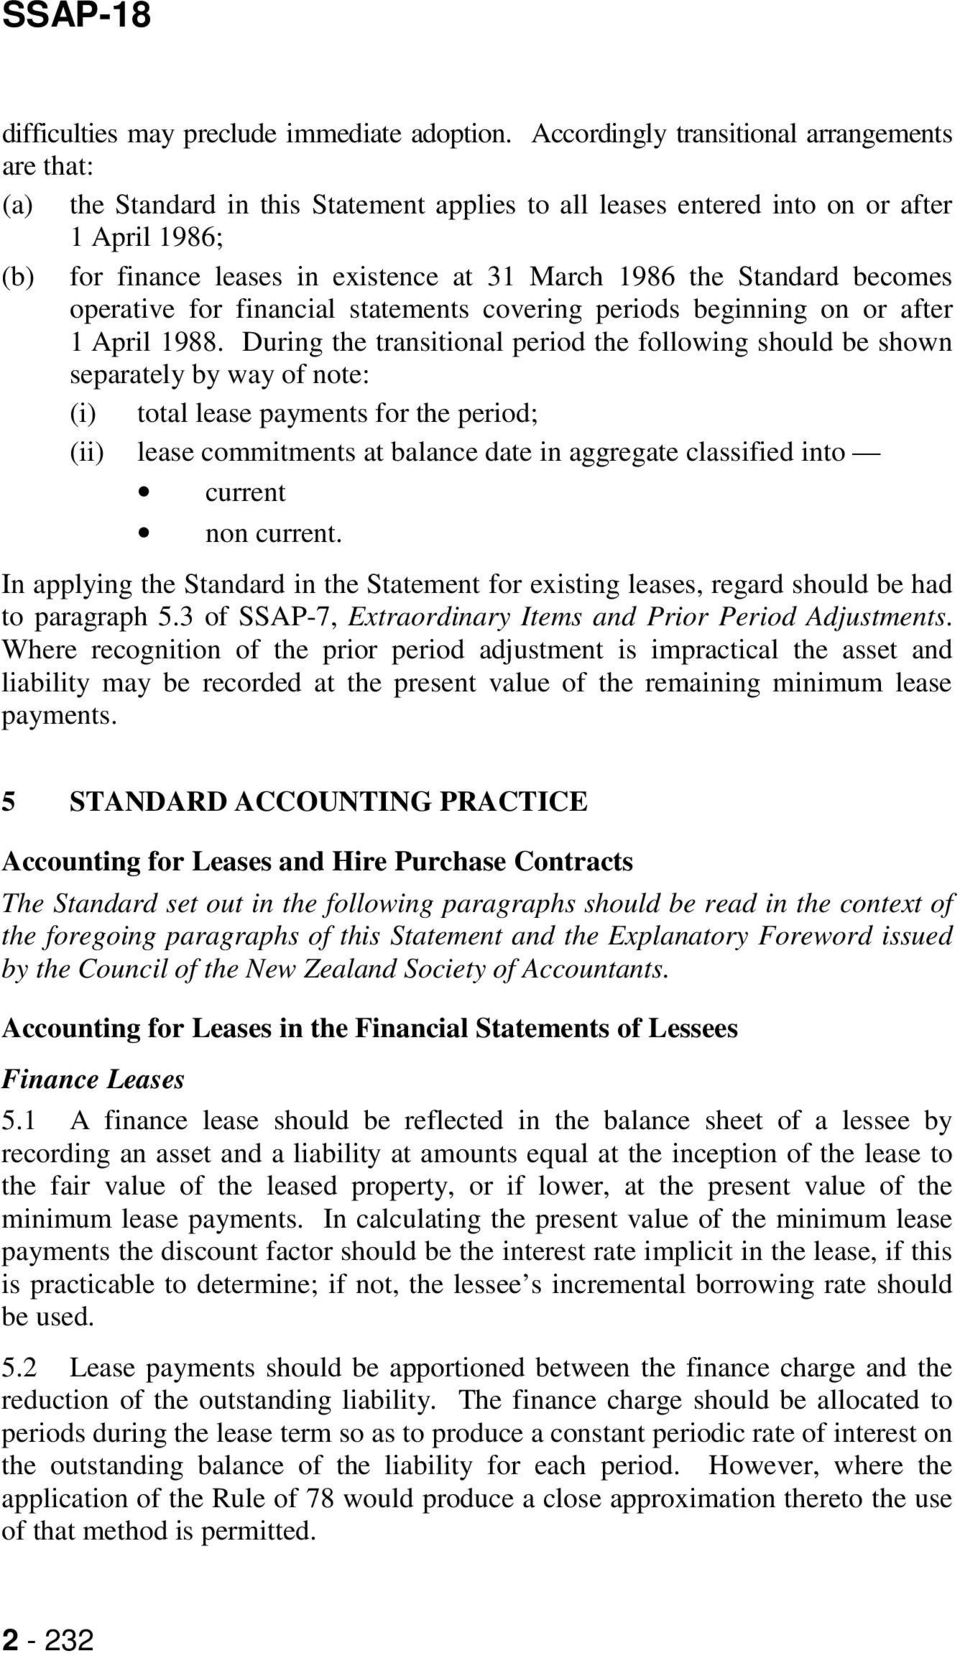 the Standard becomes operative for financial statements covering periods beginning on or after 1 April 1988.